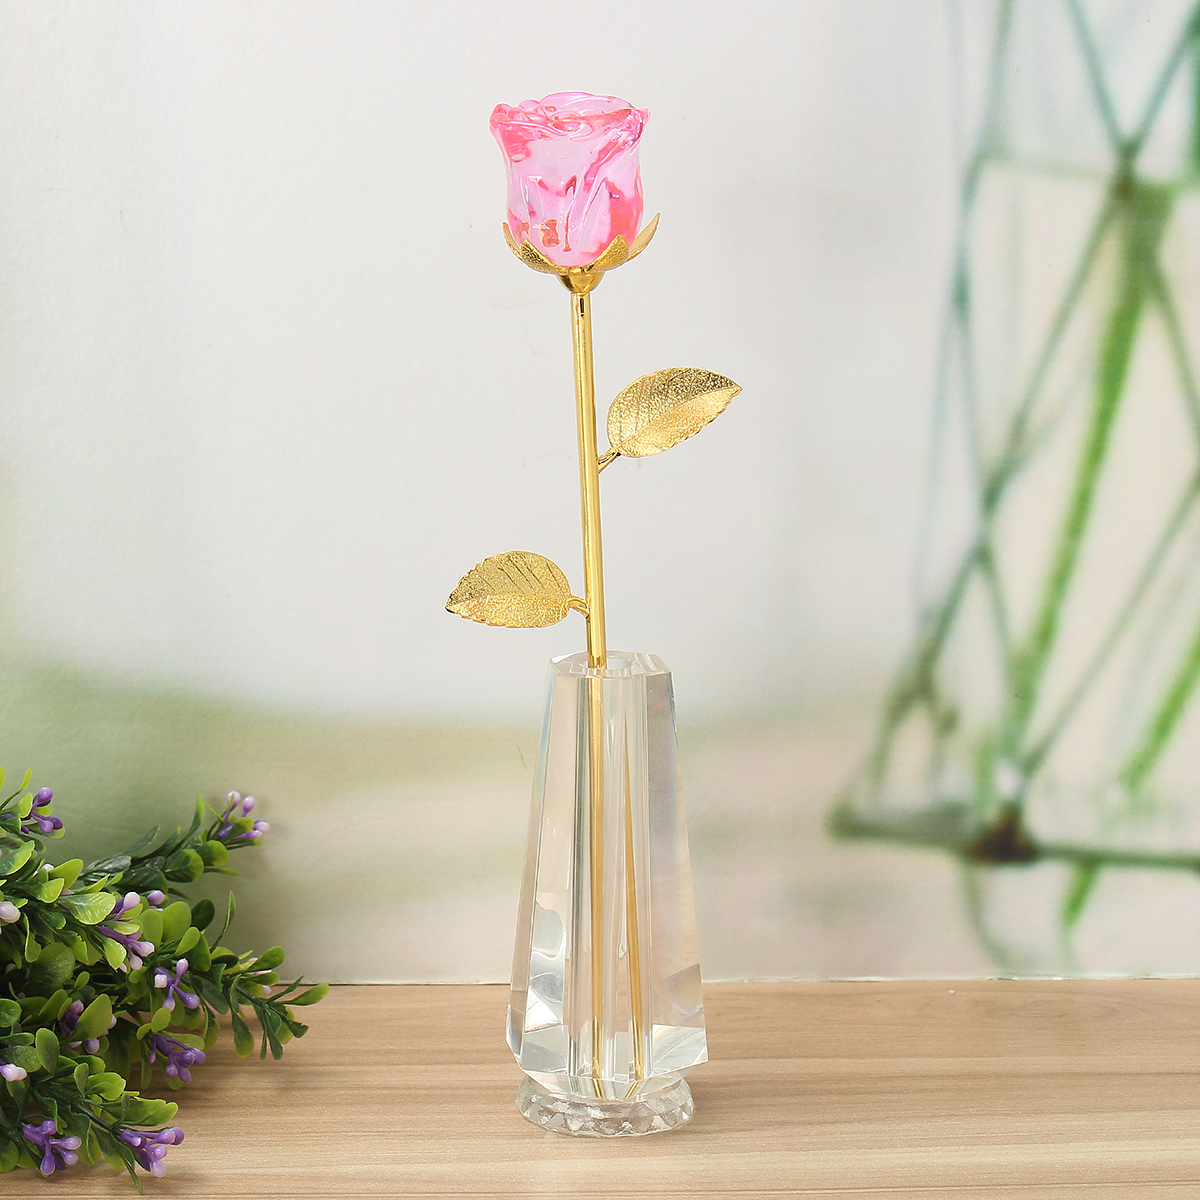 Crystal-Glass-Golden-Roses-Flower-Ornament-Valentine-Gifts-Present-with-Box-Home-Decorations-1430314-6